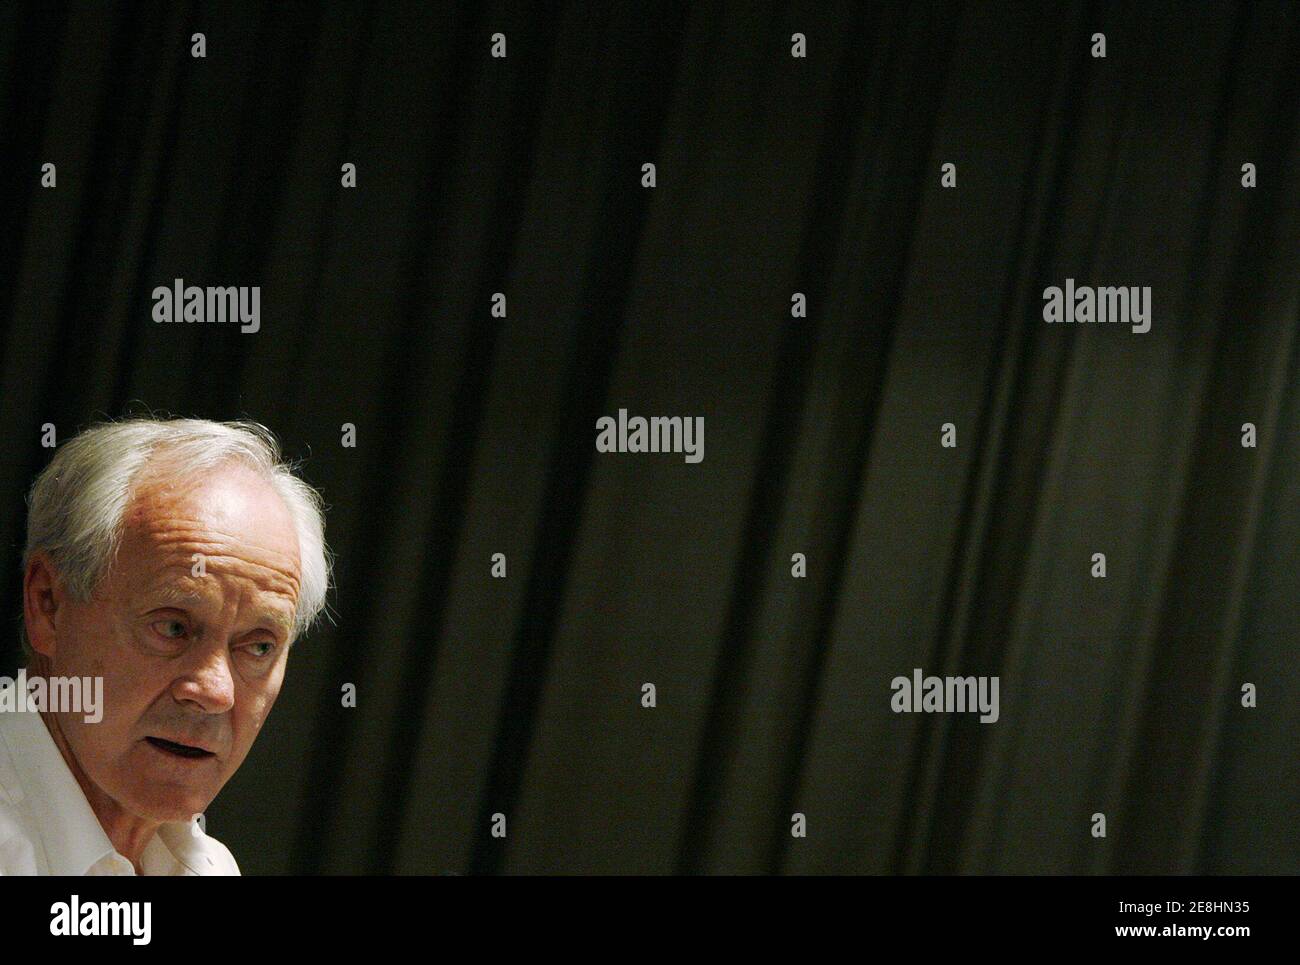 Switzerland national soccer team coach Jakob Koebi Kuhn speaks during a news conference in Bern May 25, 2007. REUTERS/Pascal Lauener (SWITZERLAND) Stock Photo